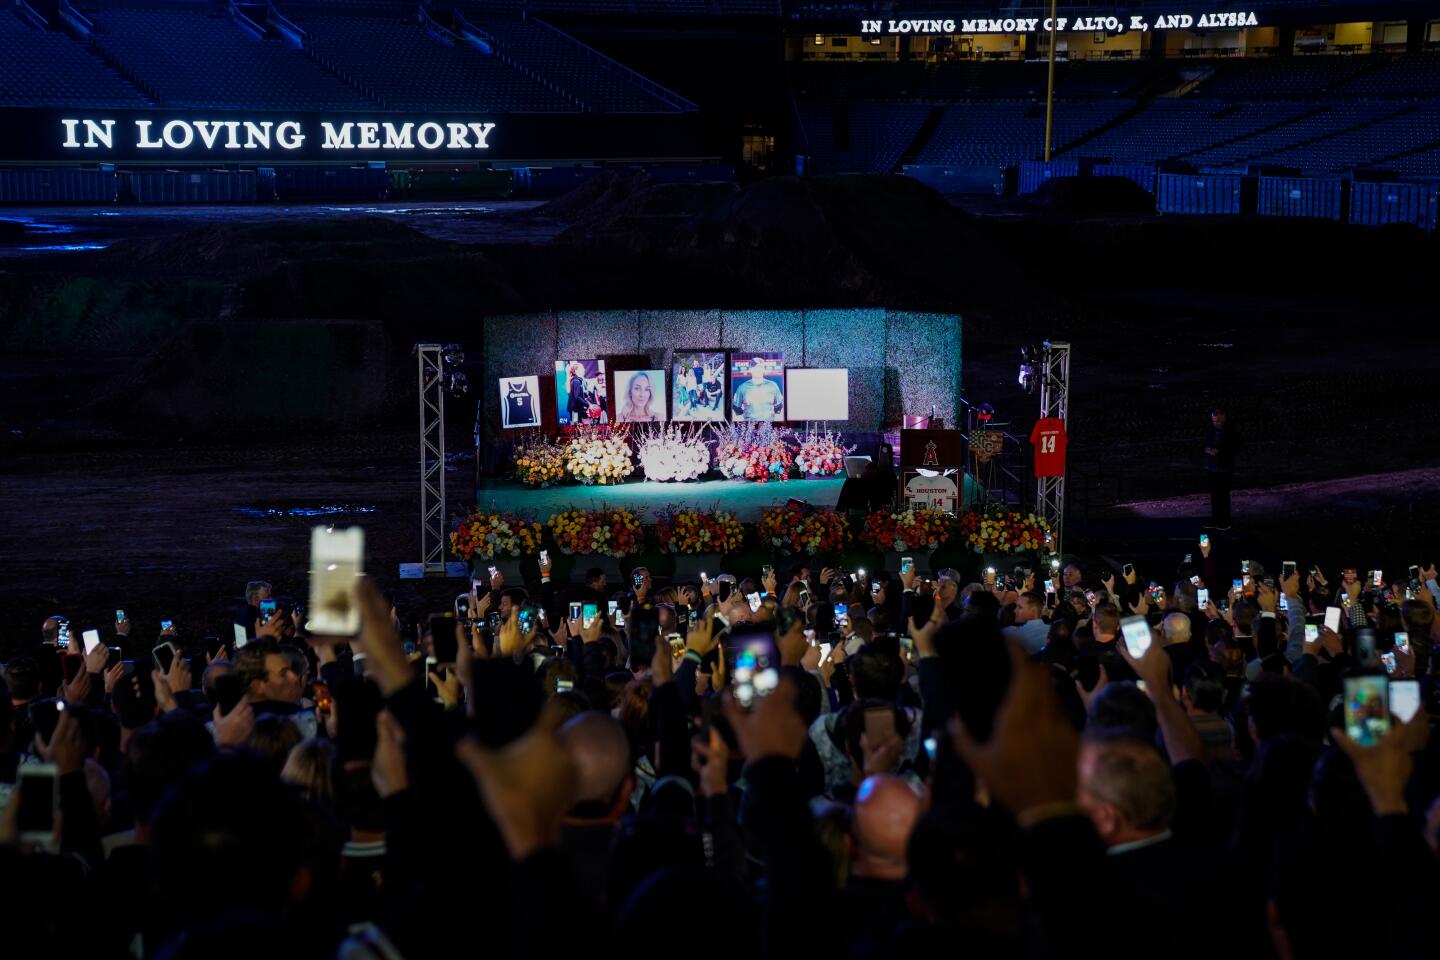 People hold up cell phones with lights on, during a celebration of life ceremony at Angel Stadium on Monday to honor the lives of John, Keri and Alyssa Altobelli.